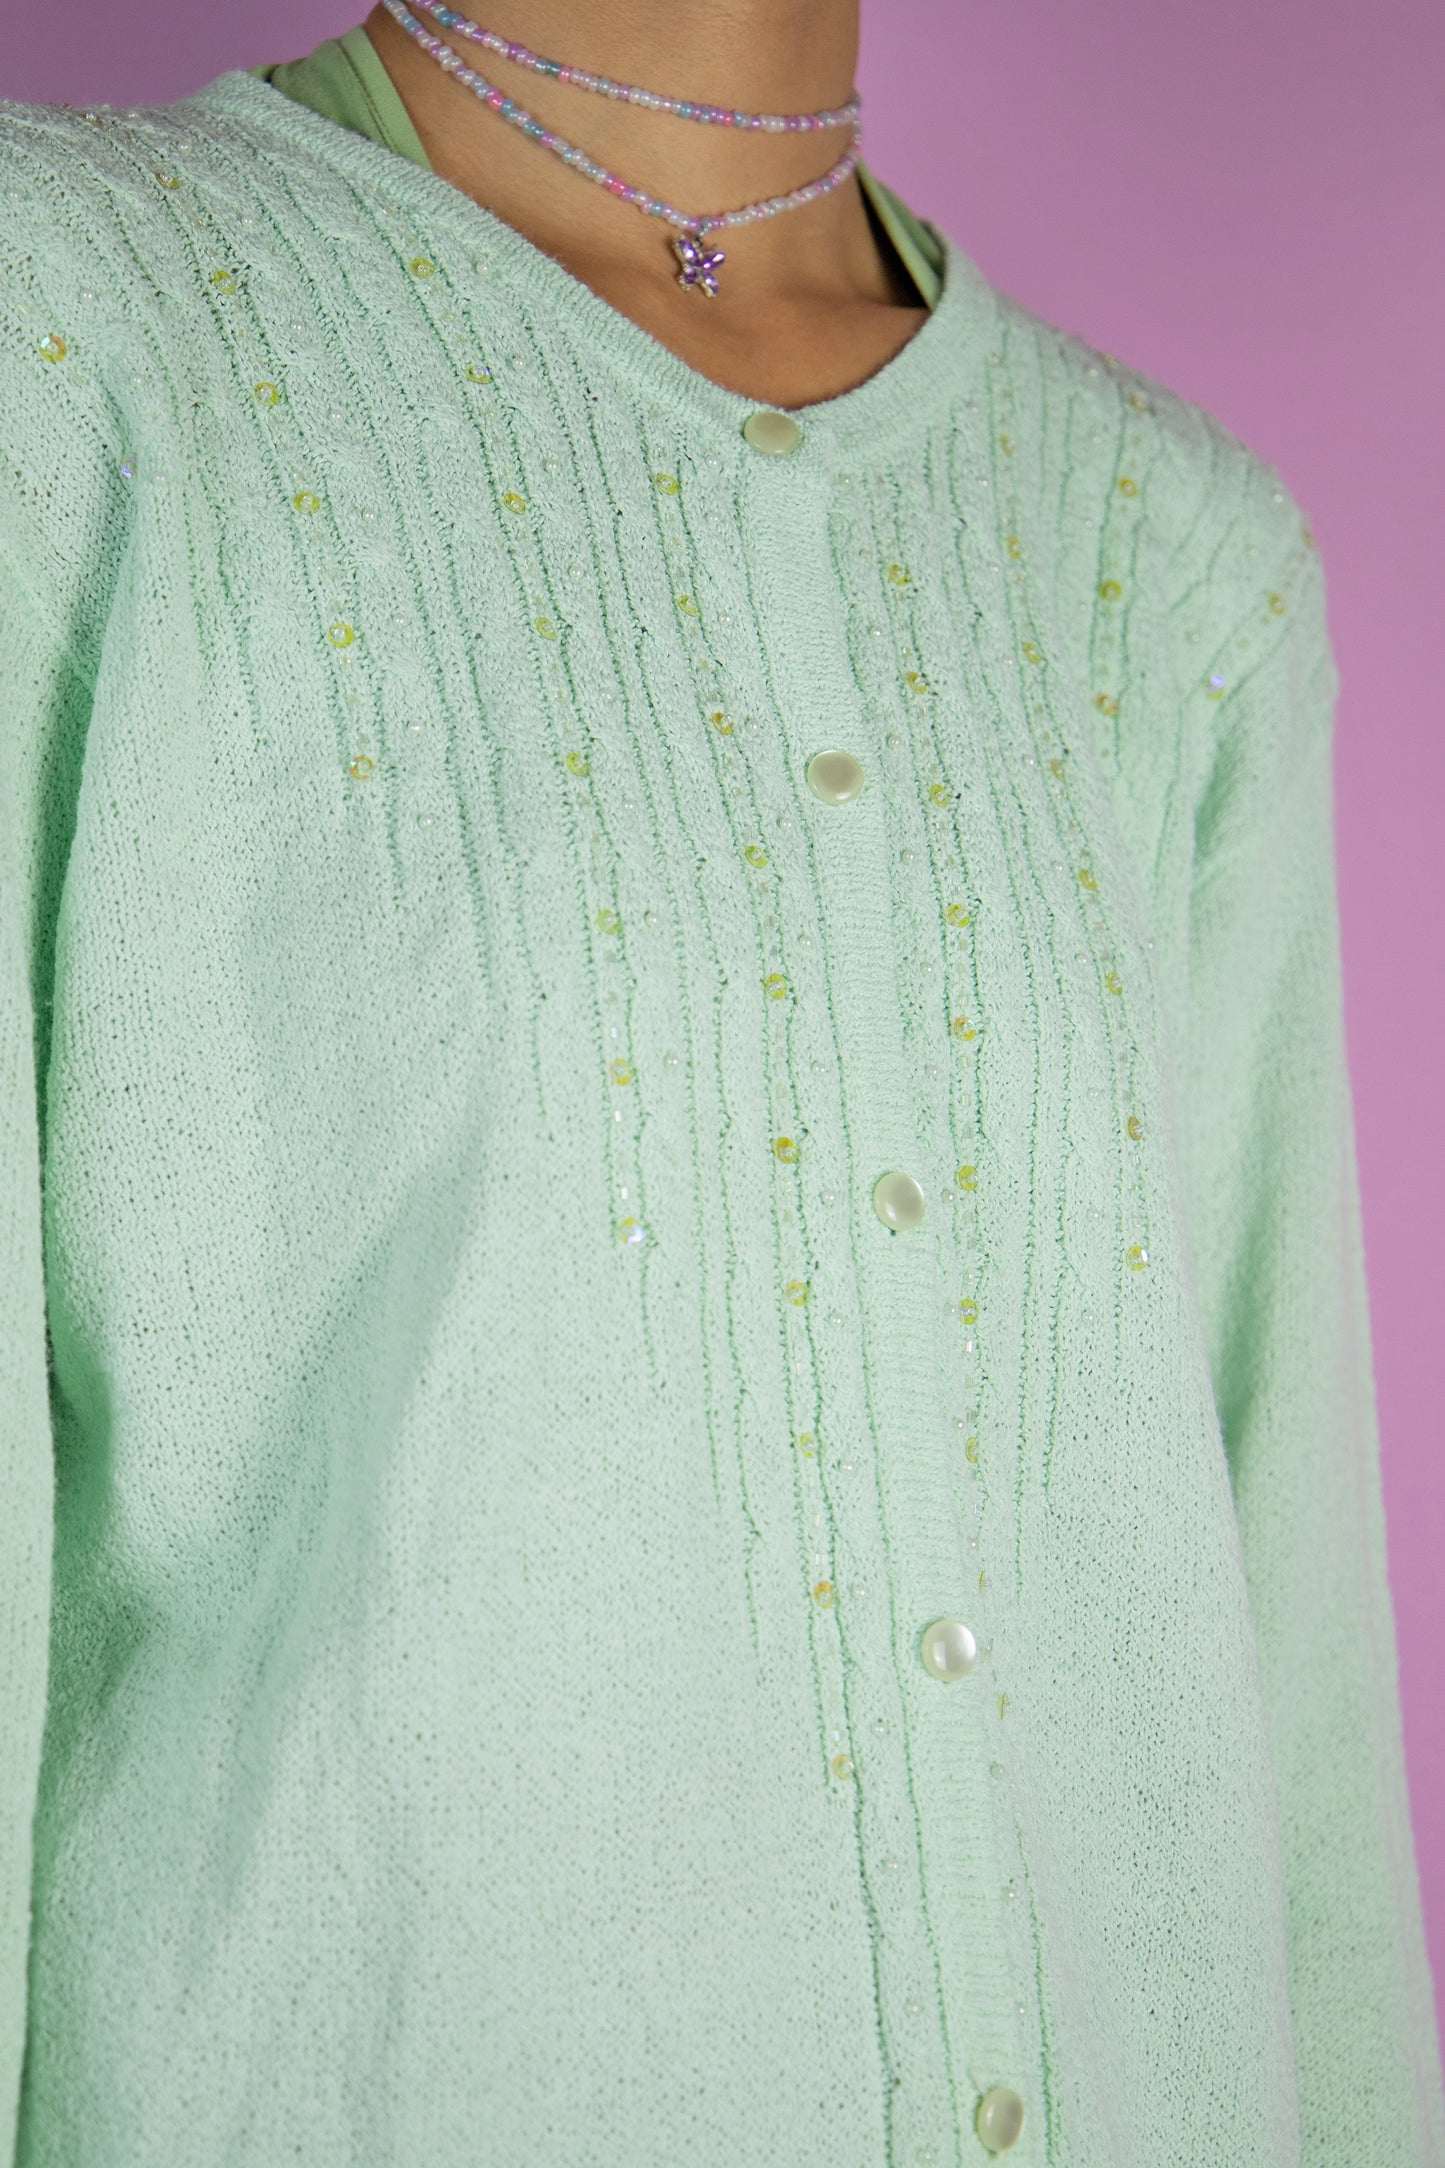 The Y2K Green Beaded Knit Cardigan is a vintage 2000s romantic pastel light mint green embellished sweater with pockets and bead and sequin detail.